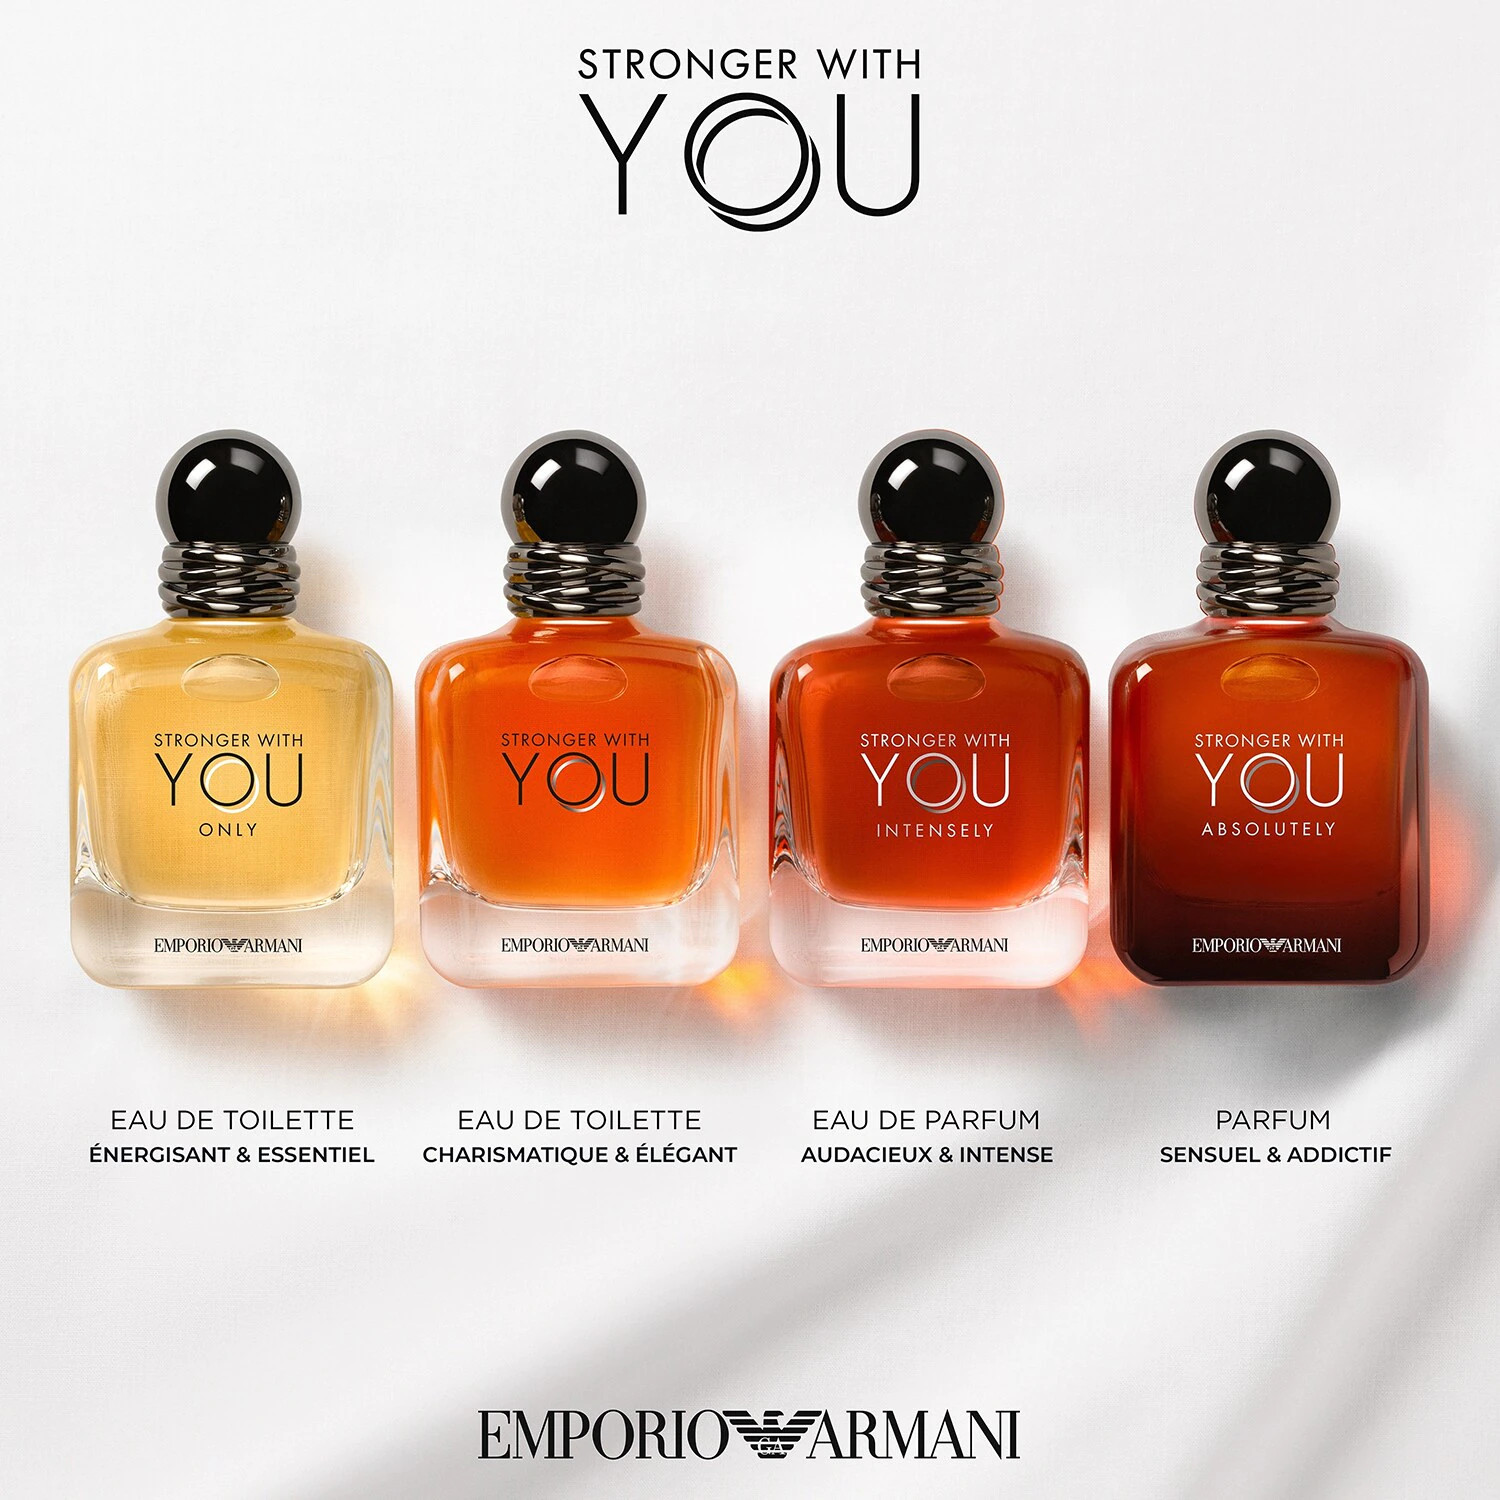 Arriba 43+ imagen armani stronger with you review - Abzlocal.mx